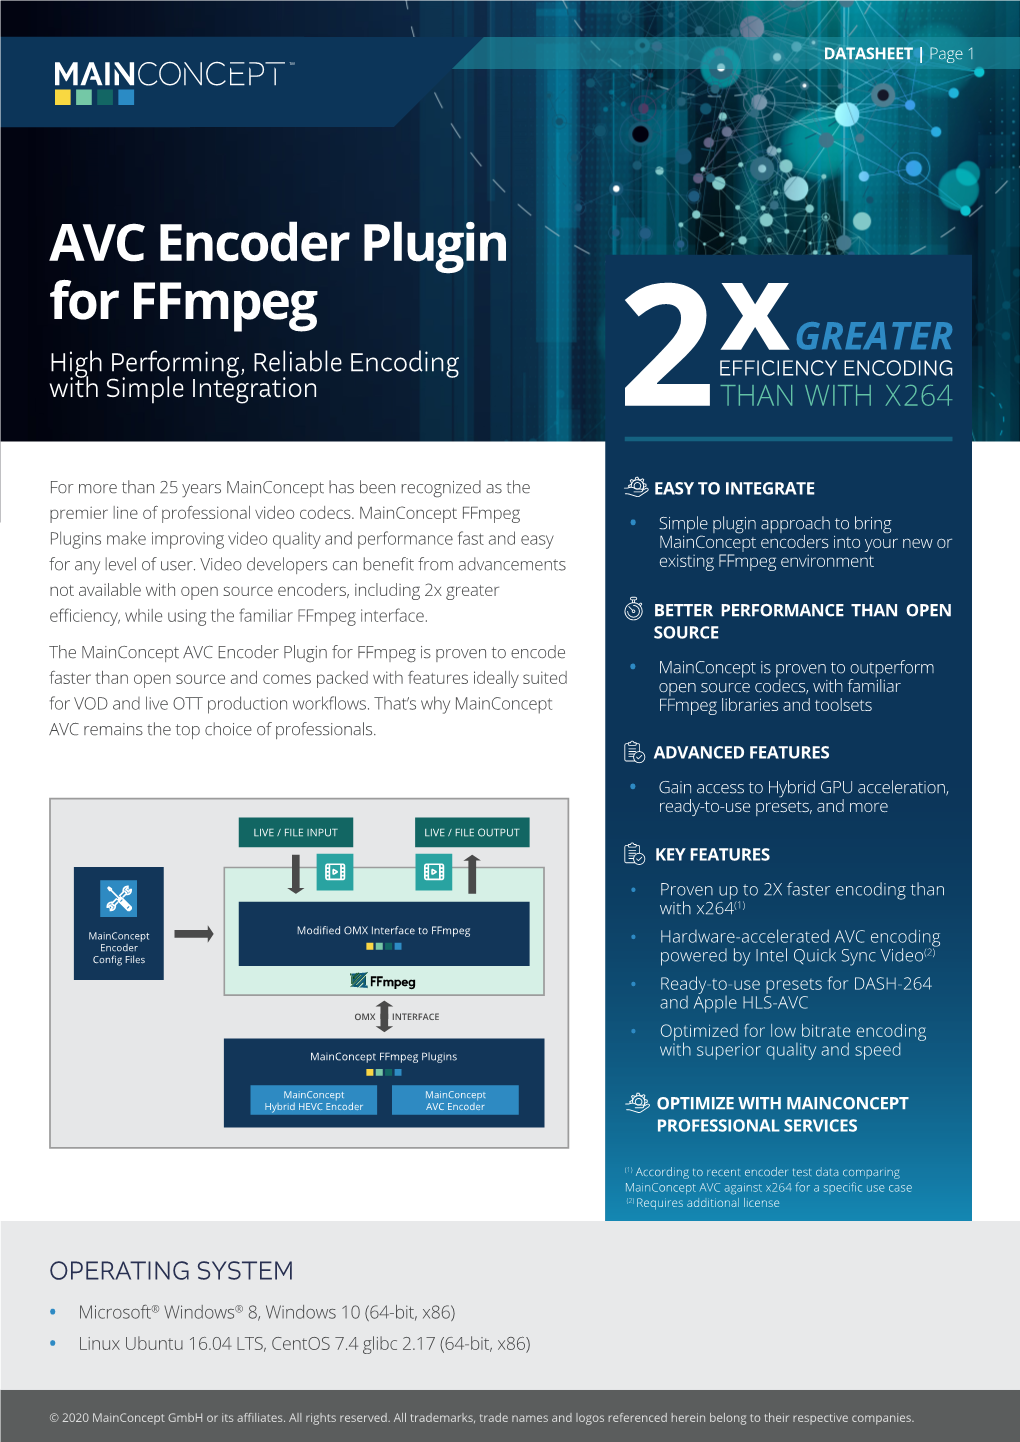 AVC Encoder Plugin for Ffmpeg High Performing, Reliable Encoding with Simple Integration